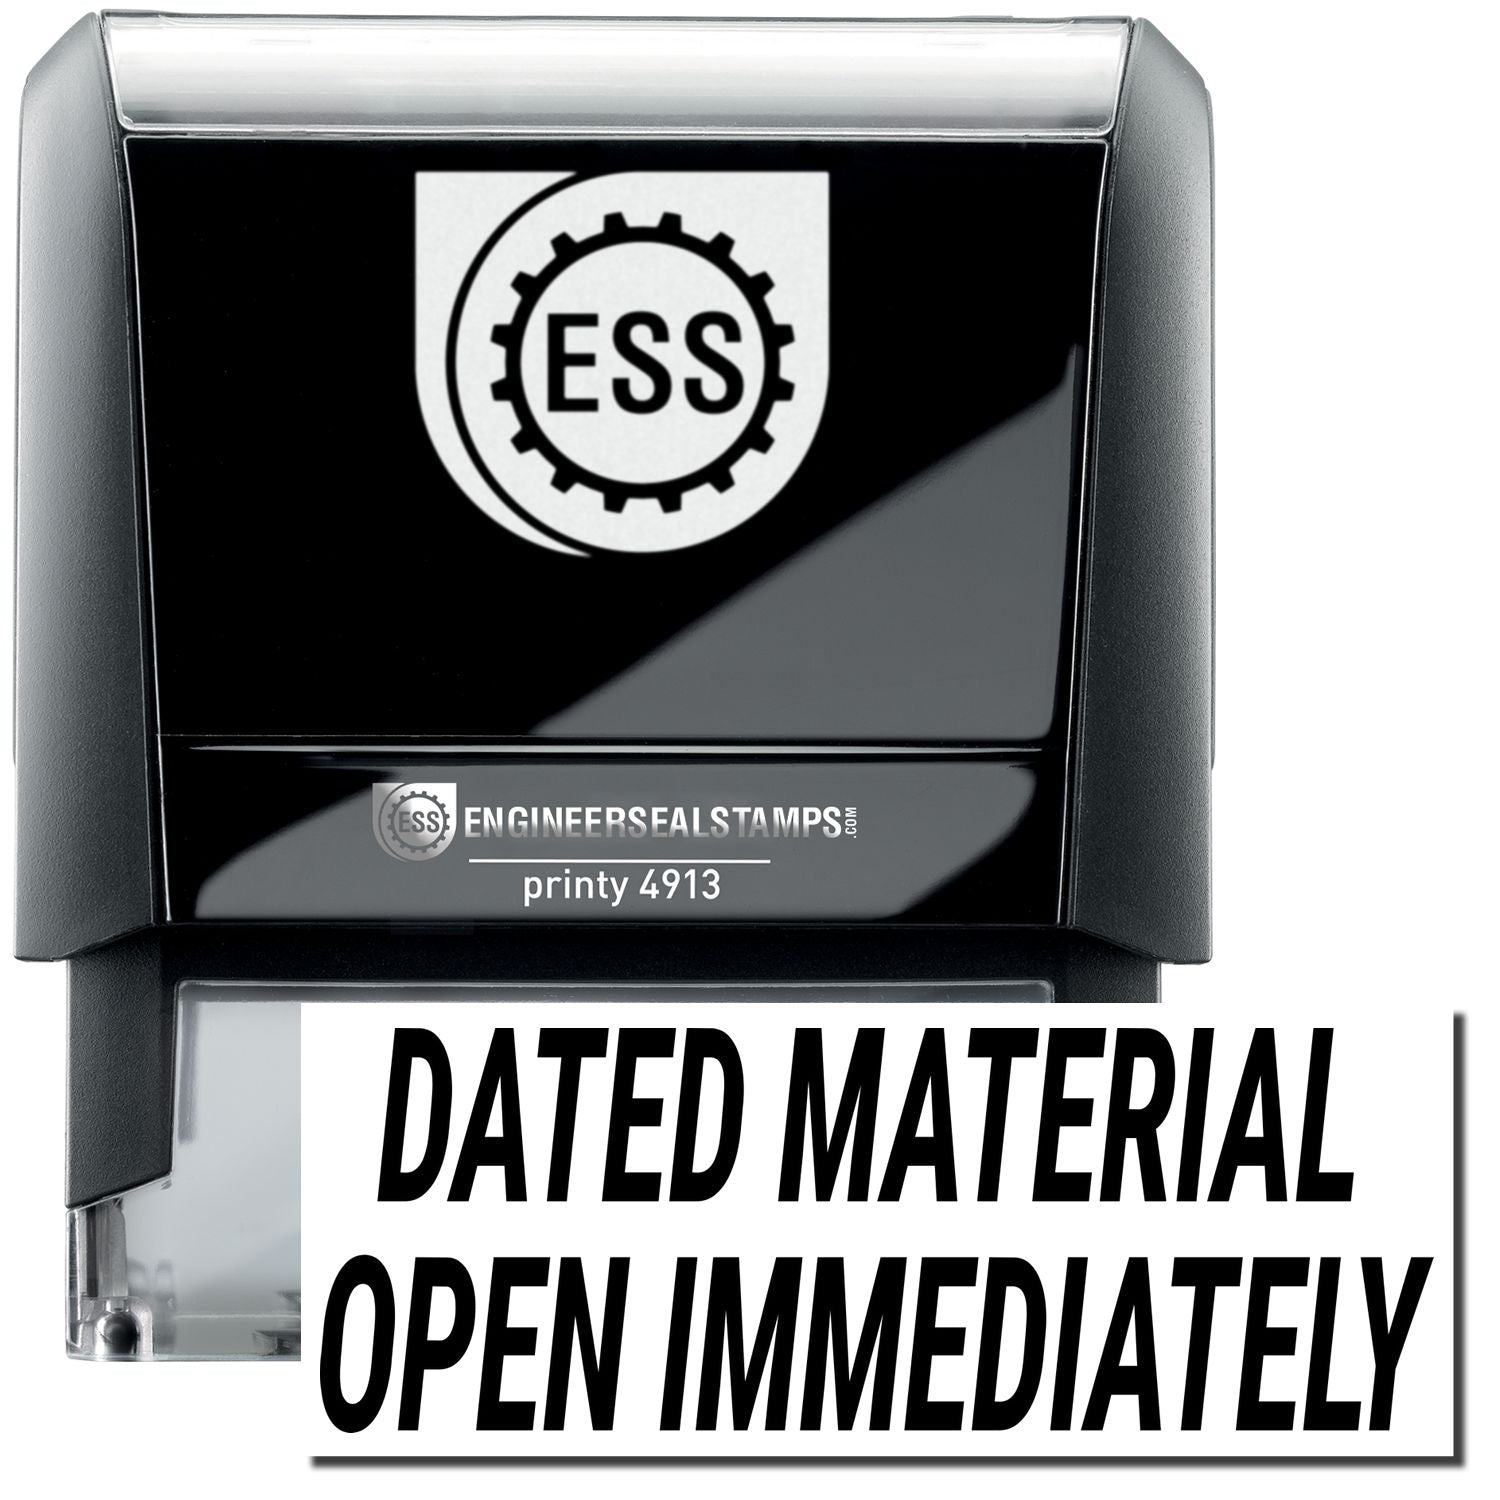 A self-inking stamp with a stamped image showing how the text "DATED MATERIAL OPEN IMMEDIATELY" in a large italic font is displayed by it after stamping.